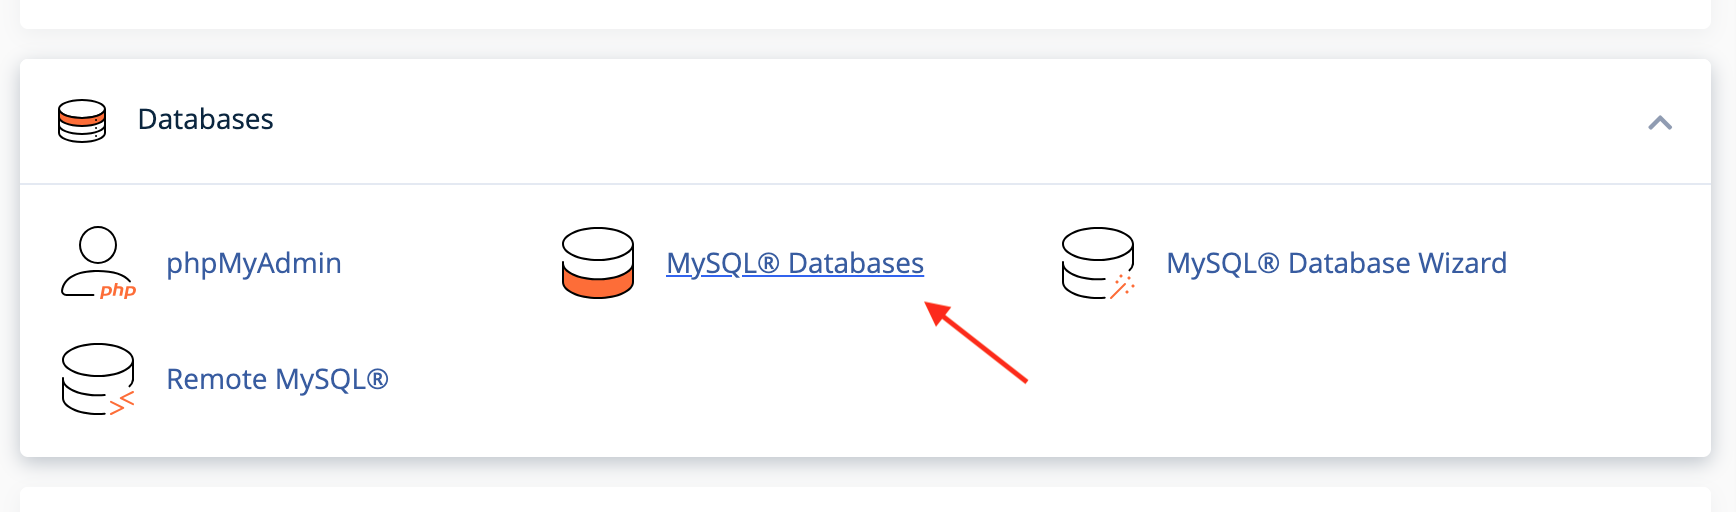 Open the MySQL Databases page within cPanel.